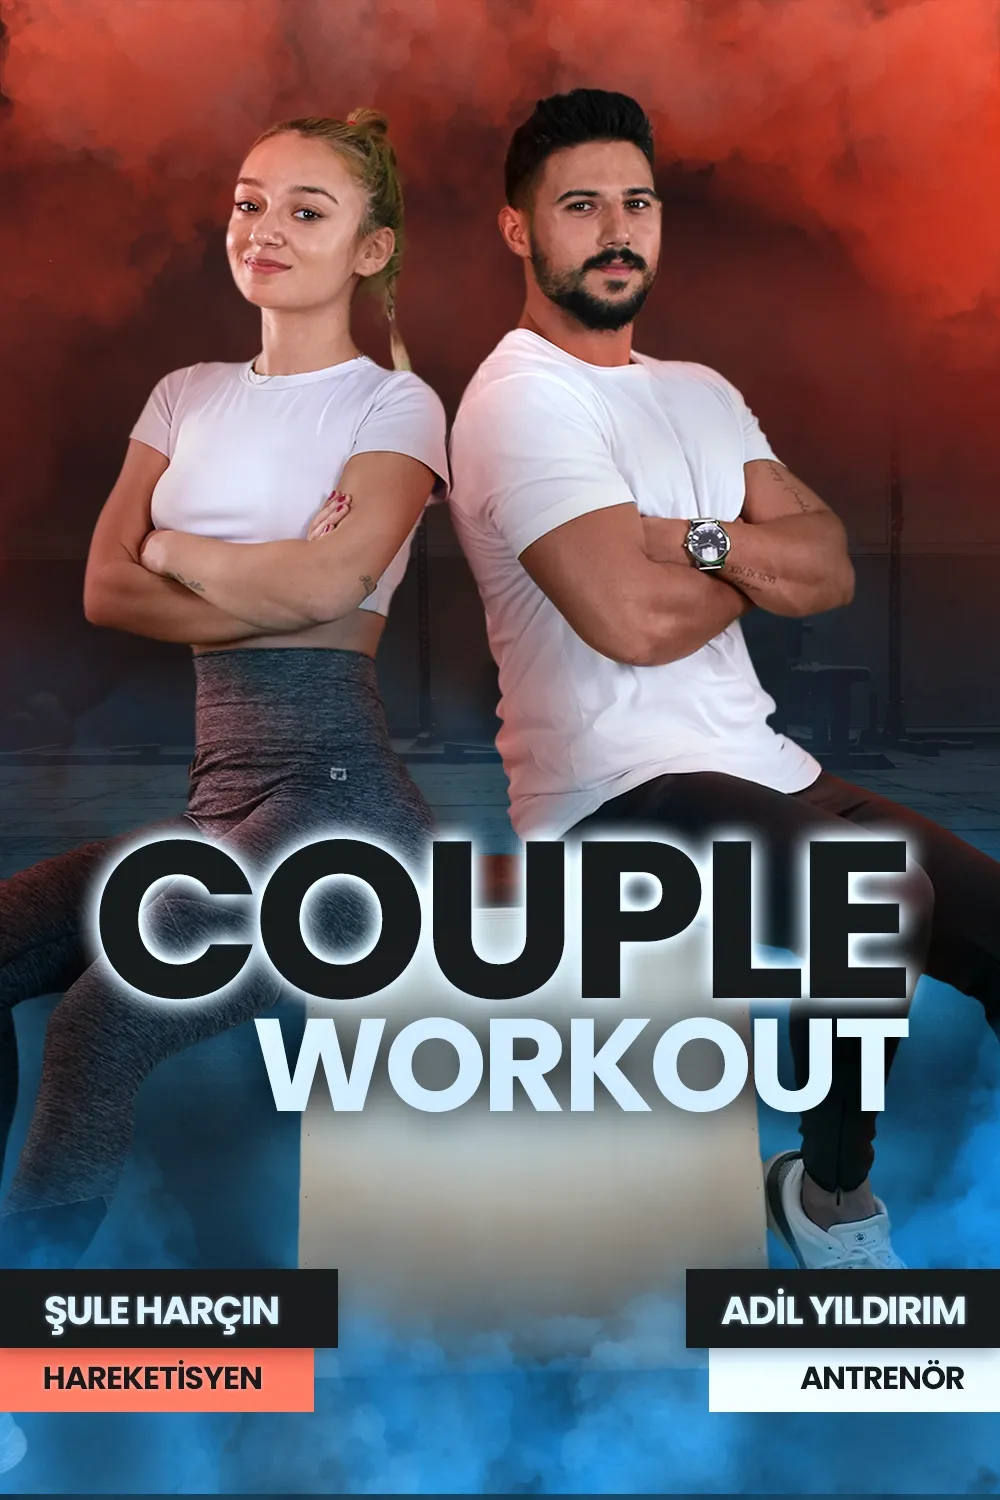 66be5a91-9b2c-4d22-835e-fac533329822_poster-Couple-Workout